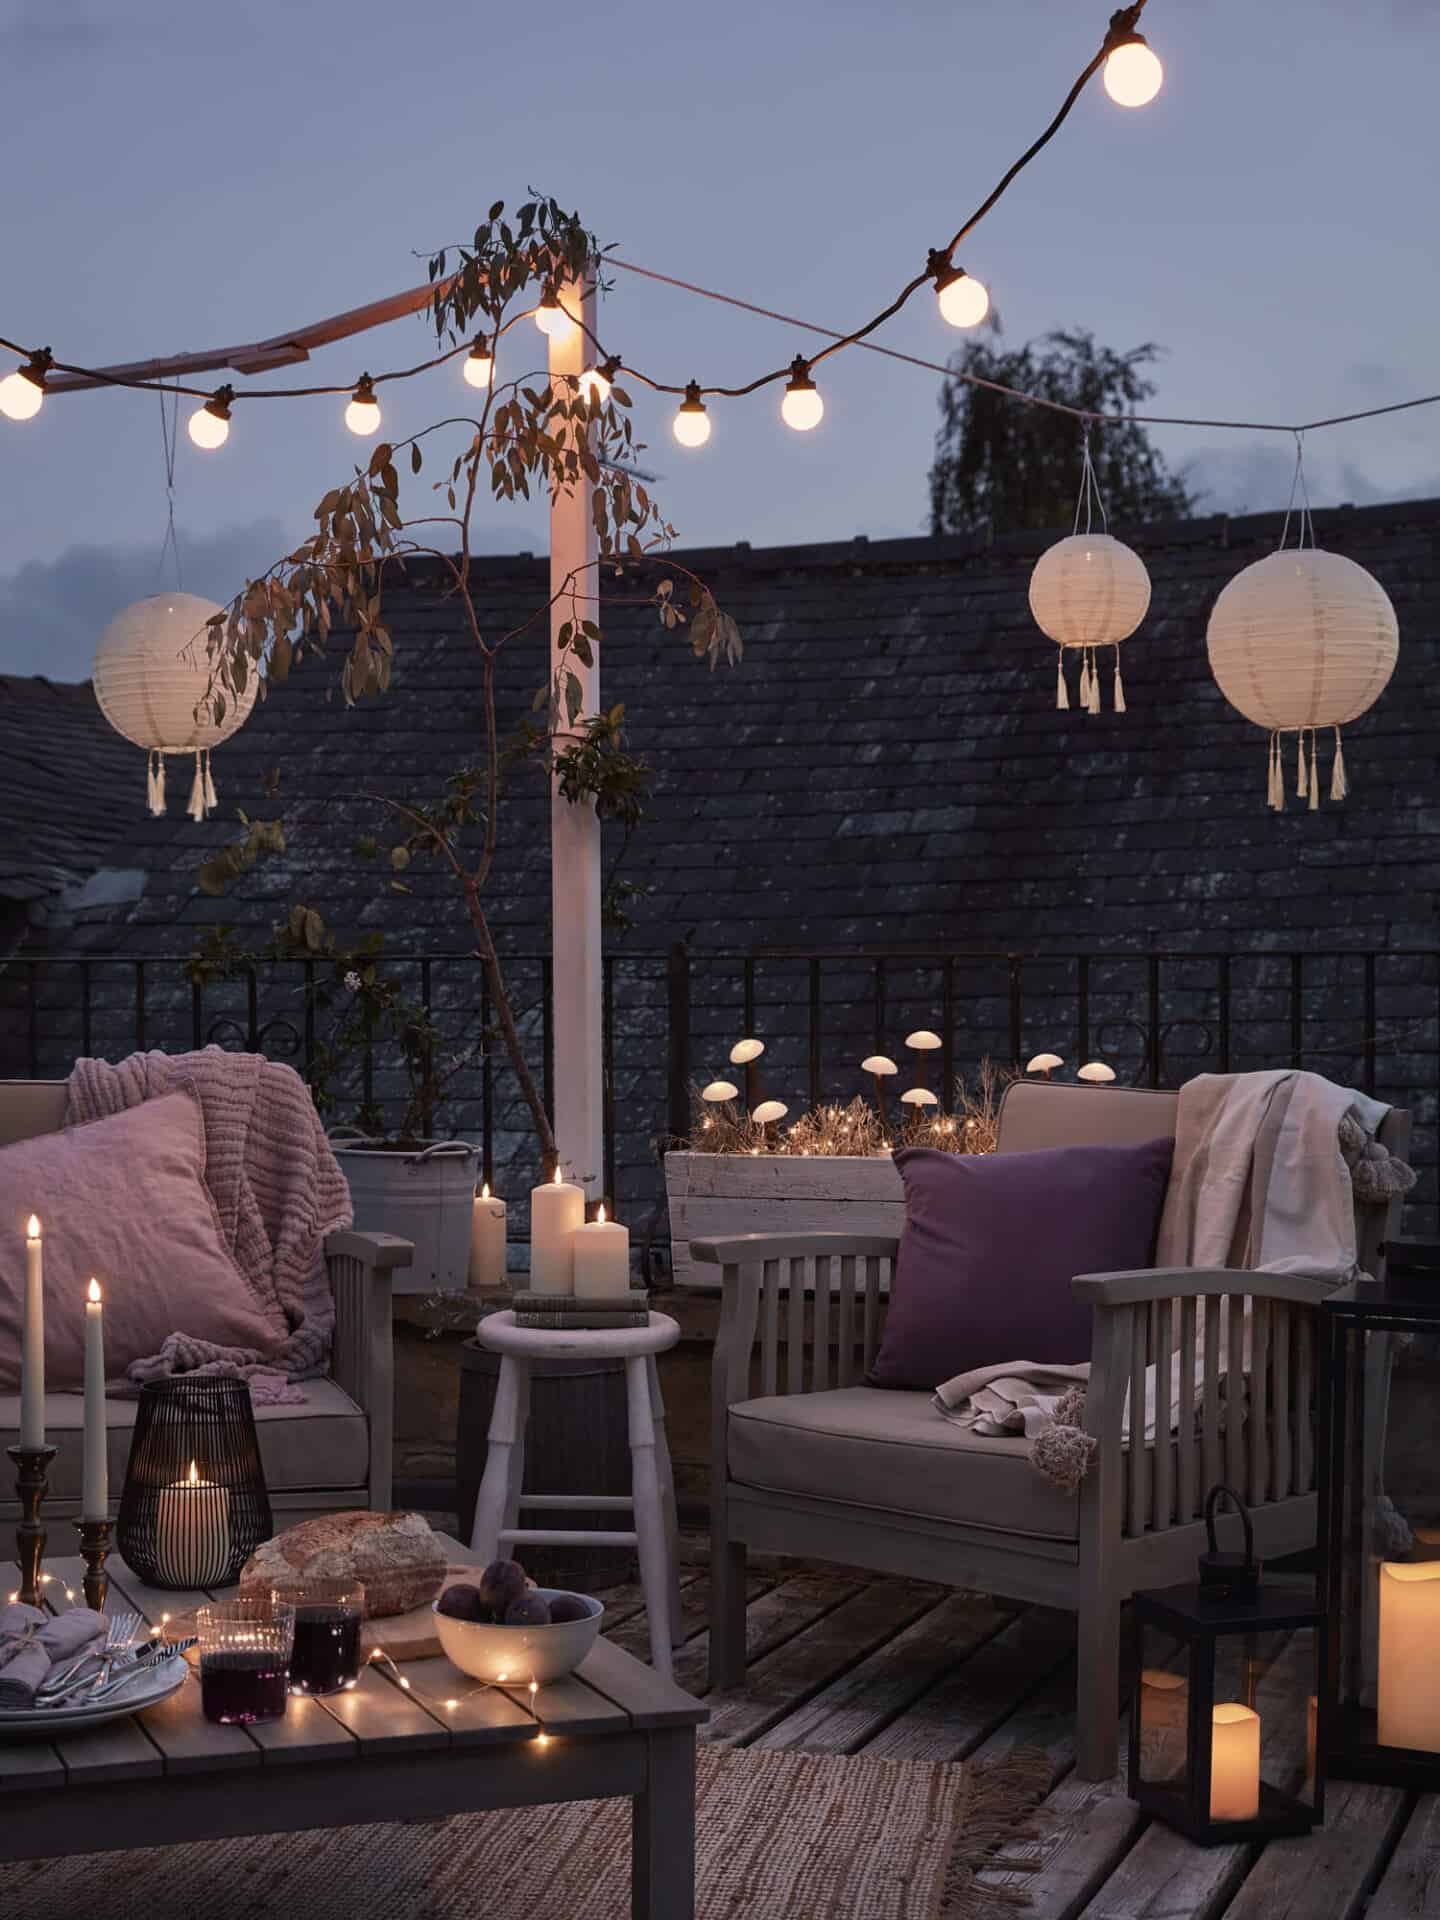 Patio featuring wooden seating, blankets, Candles, Festoon Lights, Mushroom Stake Lights and Solar Lanterns